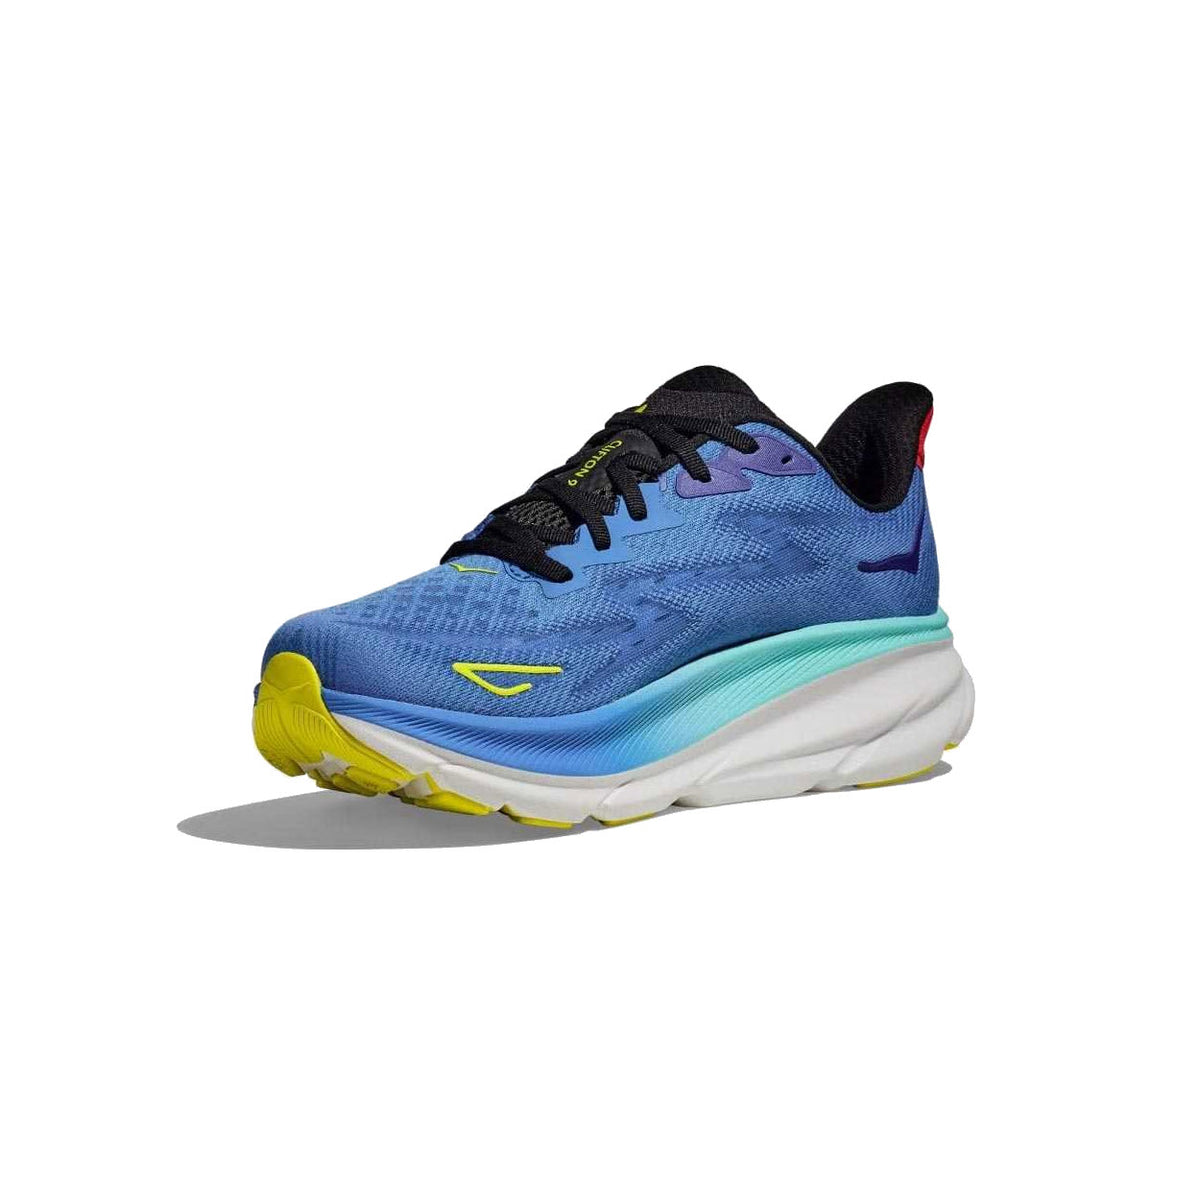 Blue and yellow Hoka Clifton 9 running shoe with a white sole, featuring a sporty design and visible brand logo on the side.